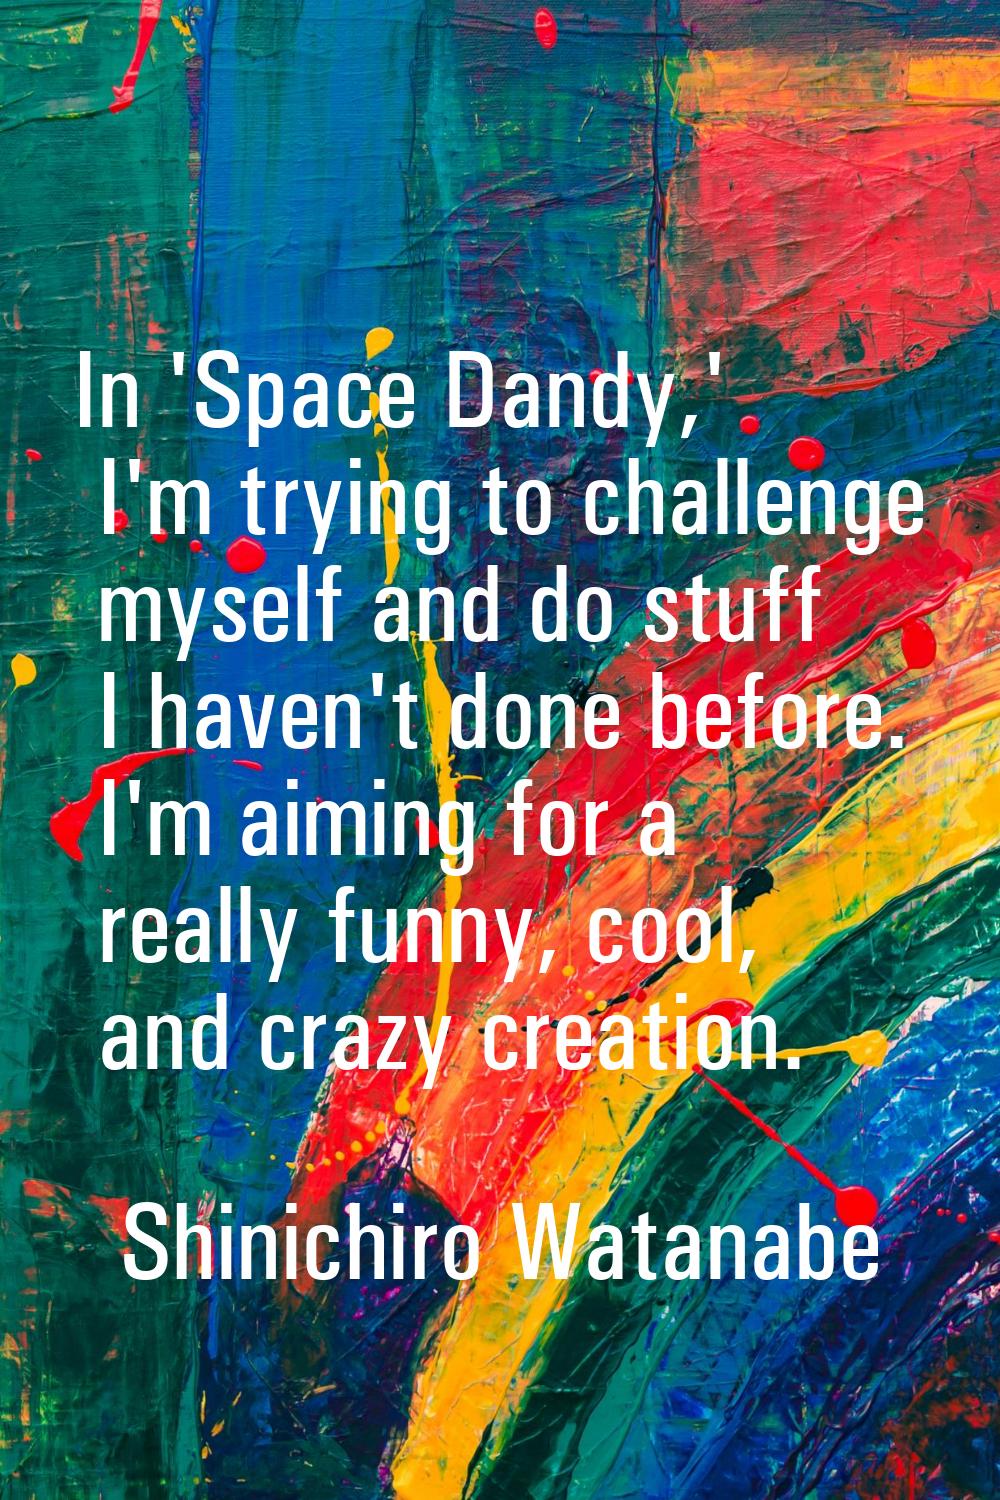 In 'Space Dandy,' I'm trying to challenge myself and do stuff I haven't done before. I'm aiming for